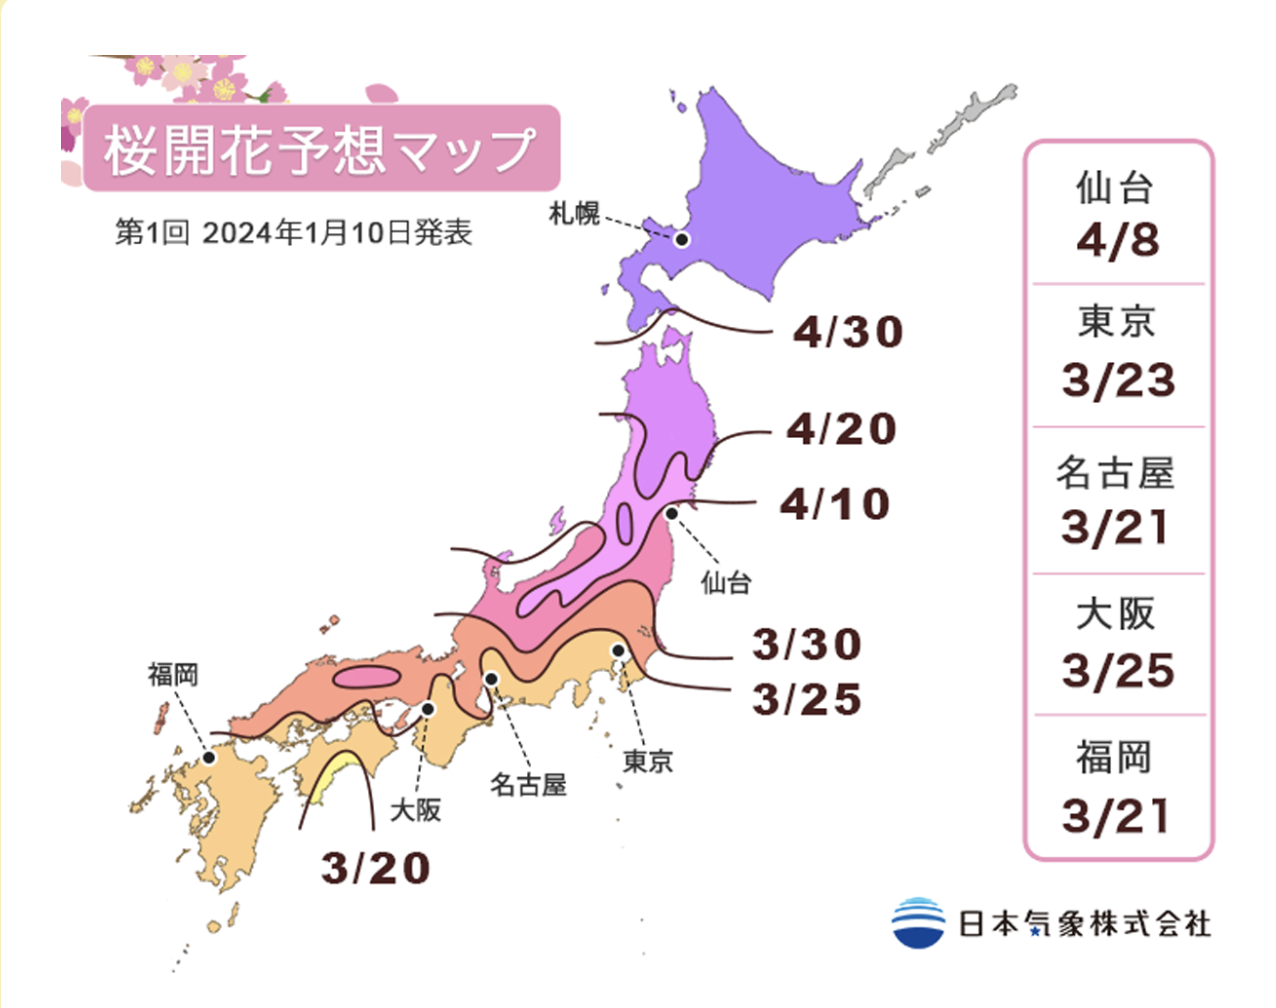 For tourists, the forecast for cherry blossom blooming in Japan for the year 2024 has been released